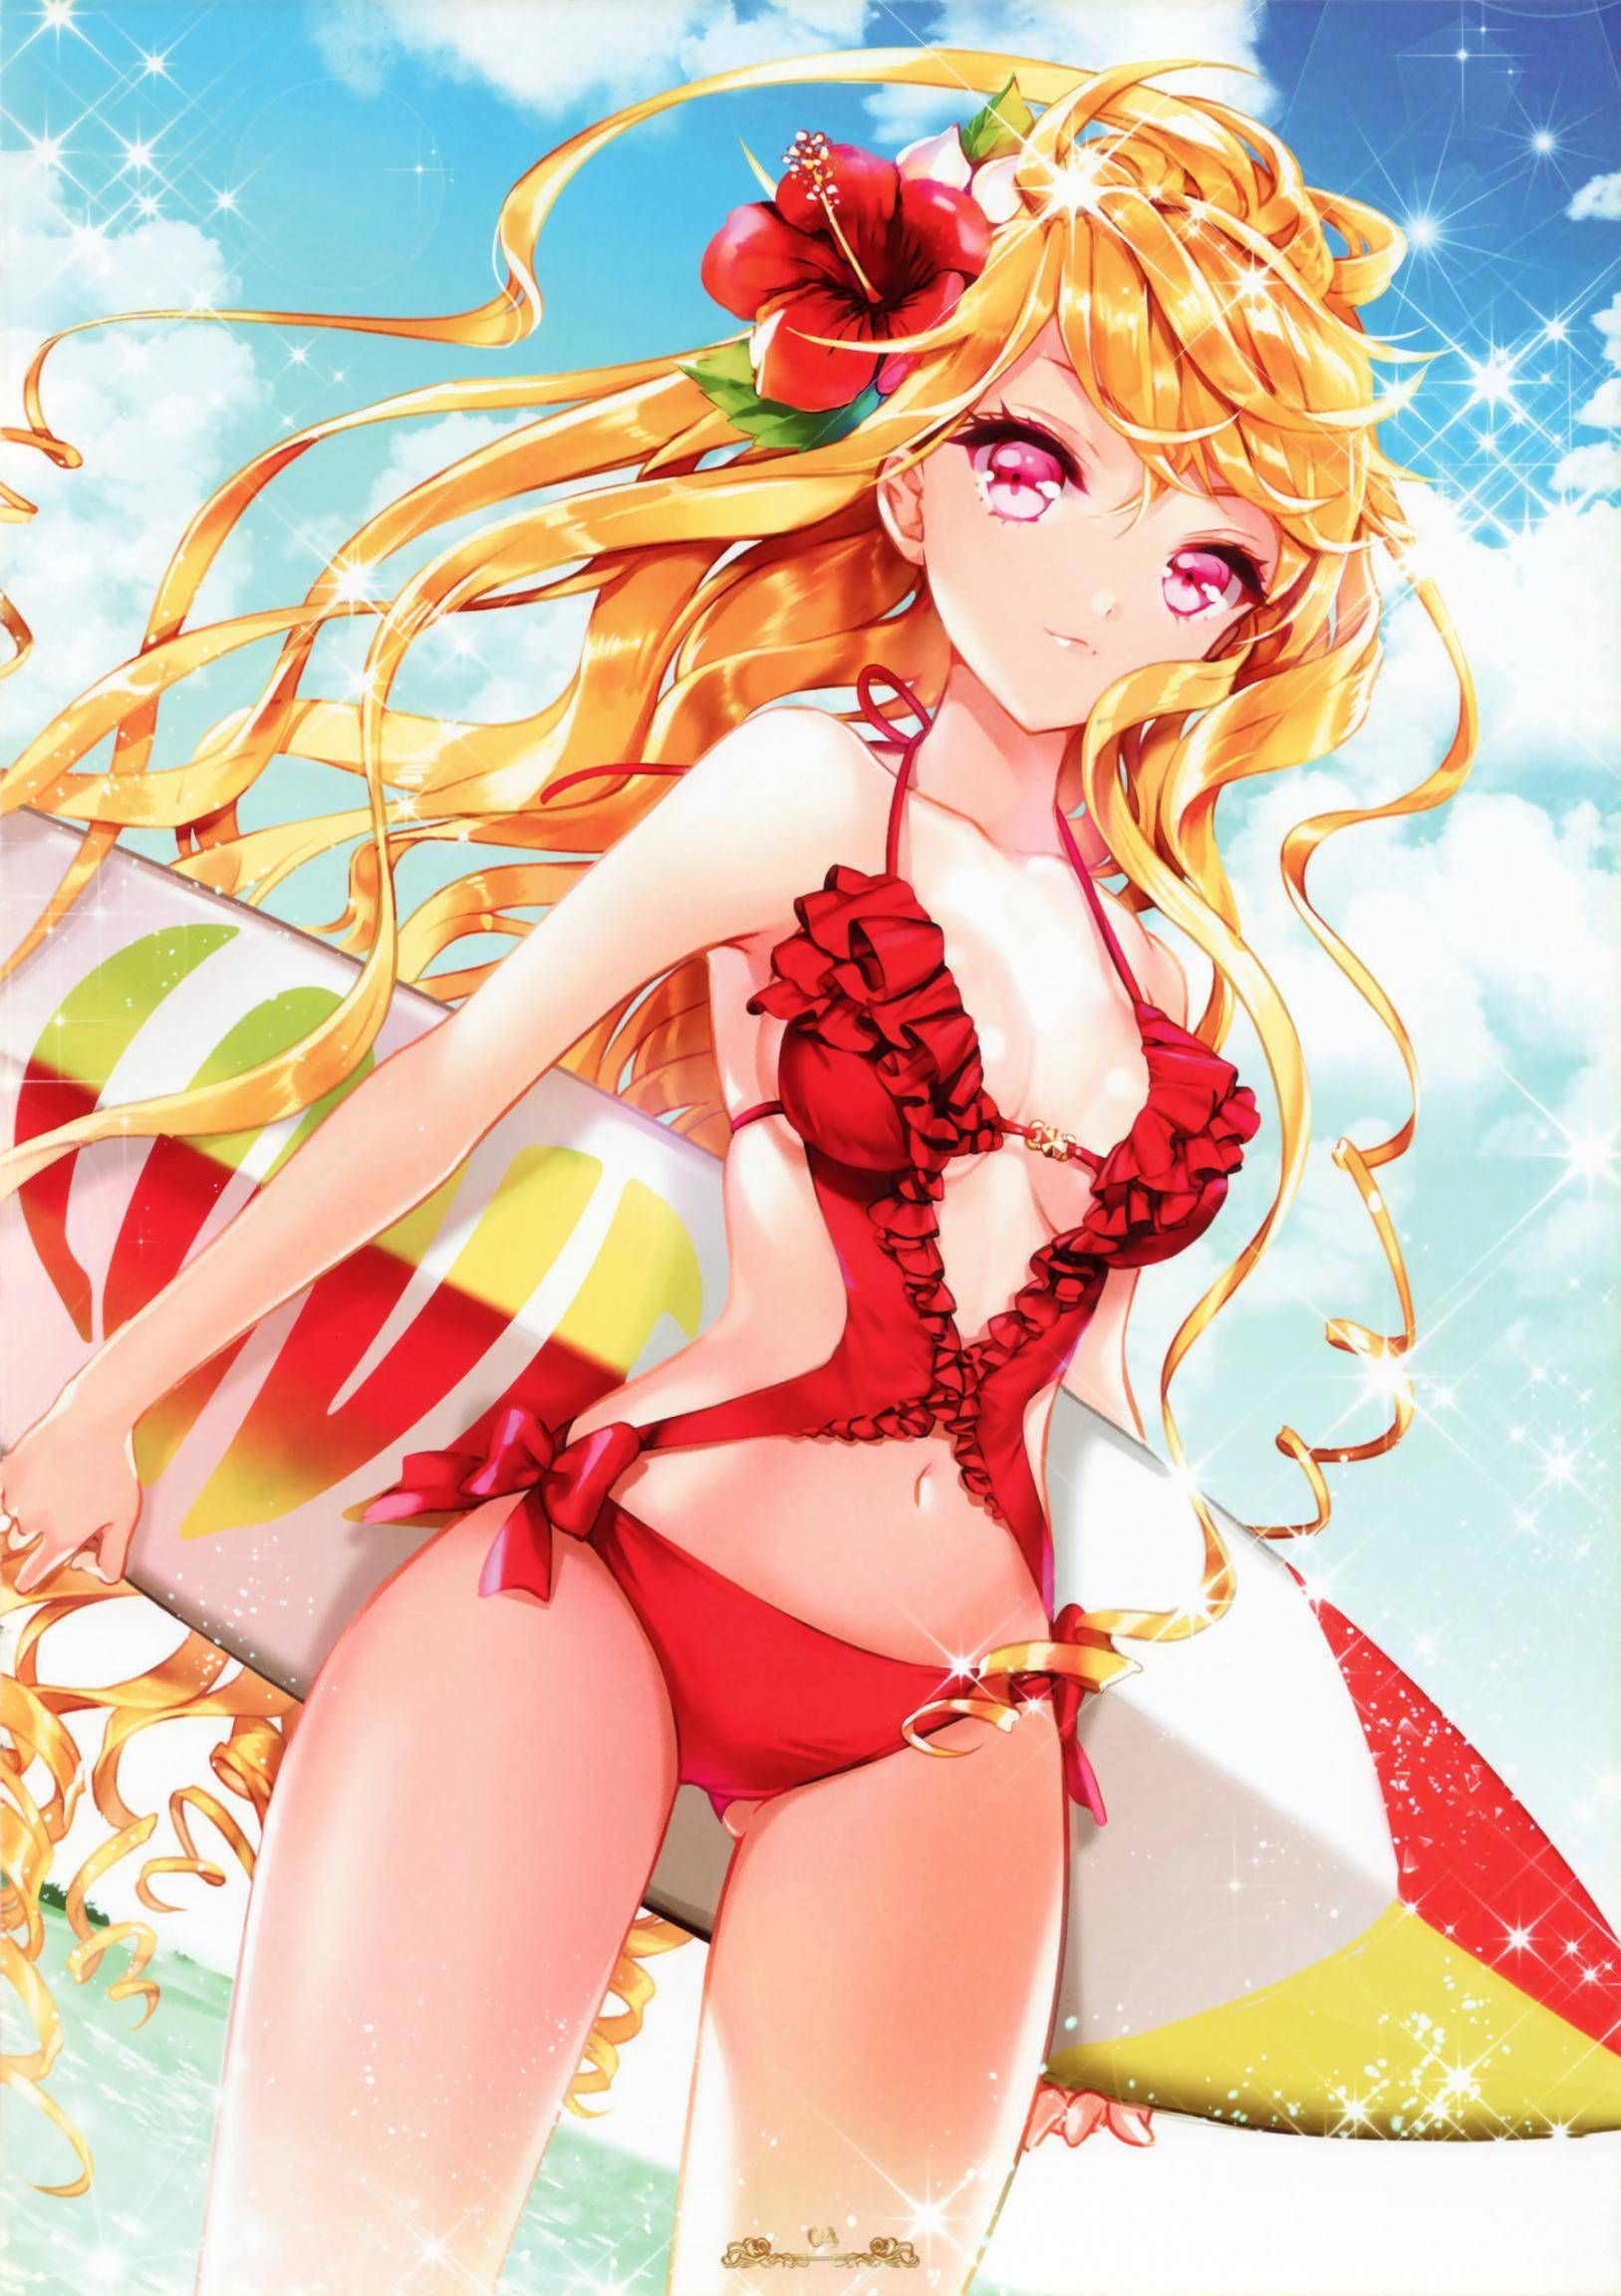 Swimsuits are erotic I can't believe I'm flossing in such a way, just like pants round dashi 14